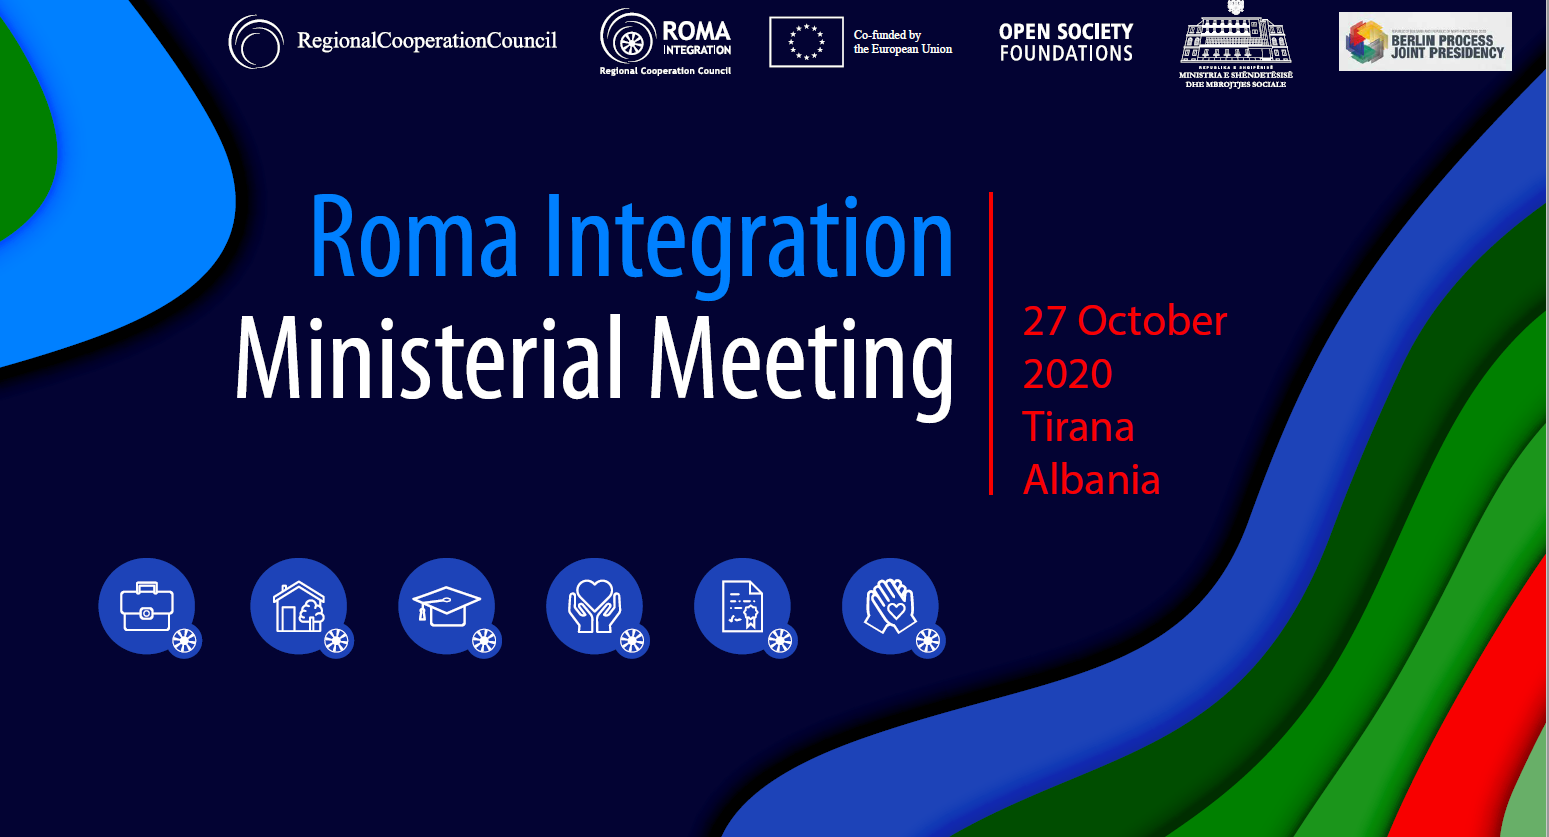 Tirana hosts Ministerial Meeting on Roma Integration on 27 October 2020, with housing, civil registration, data collection & budgeting in focus